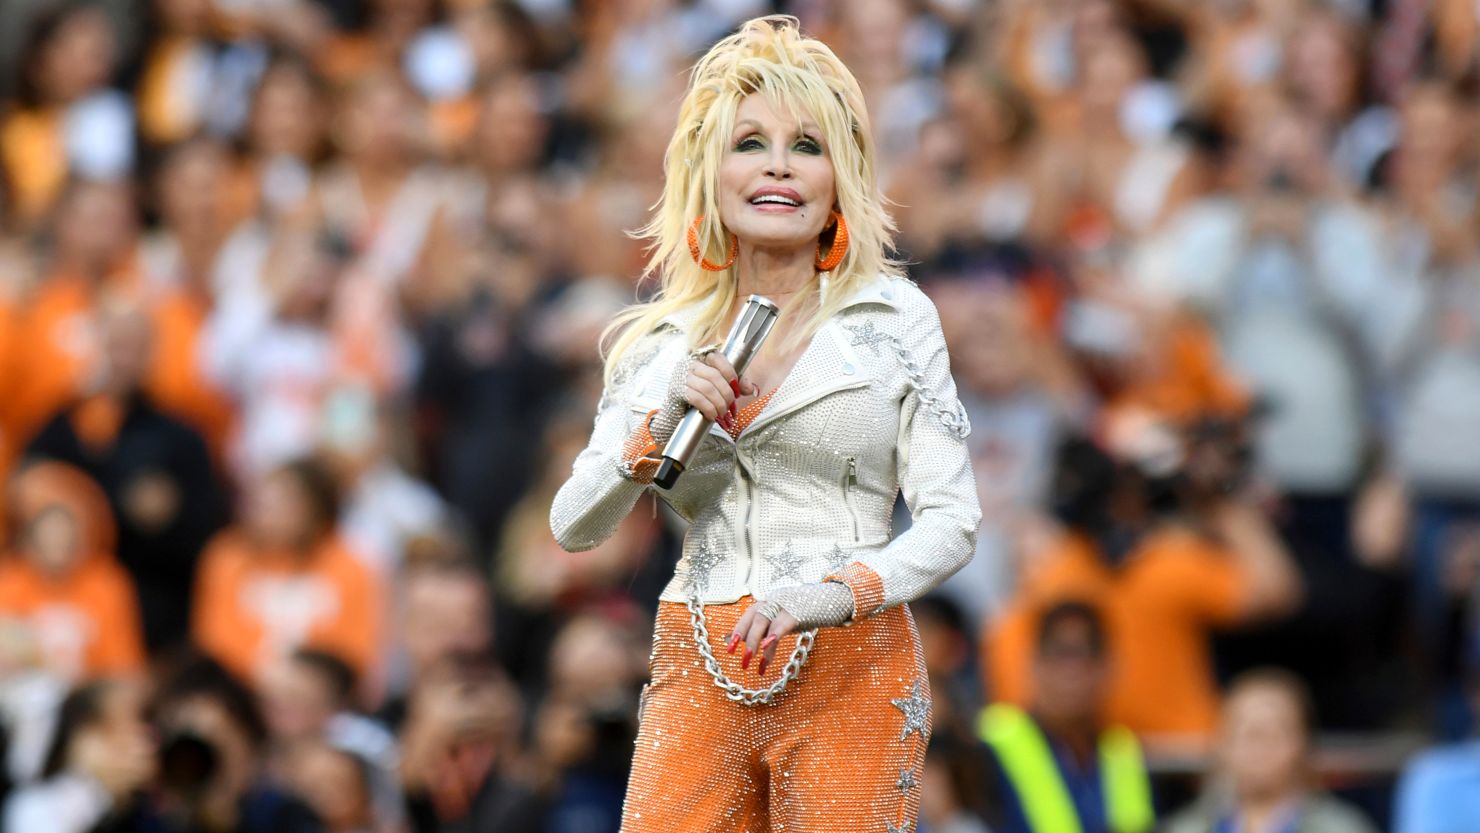 Dolly Parton releases surprise songs for her 78th birthday CNN